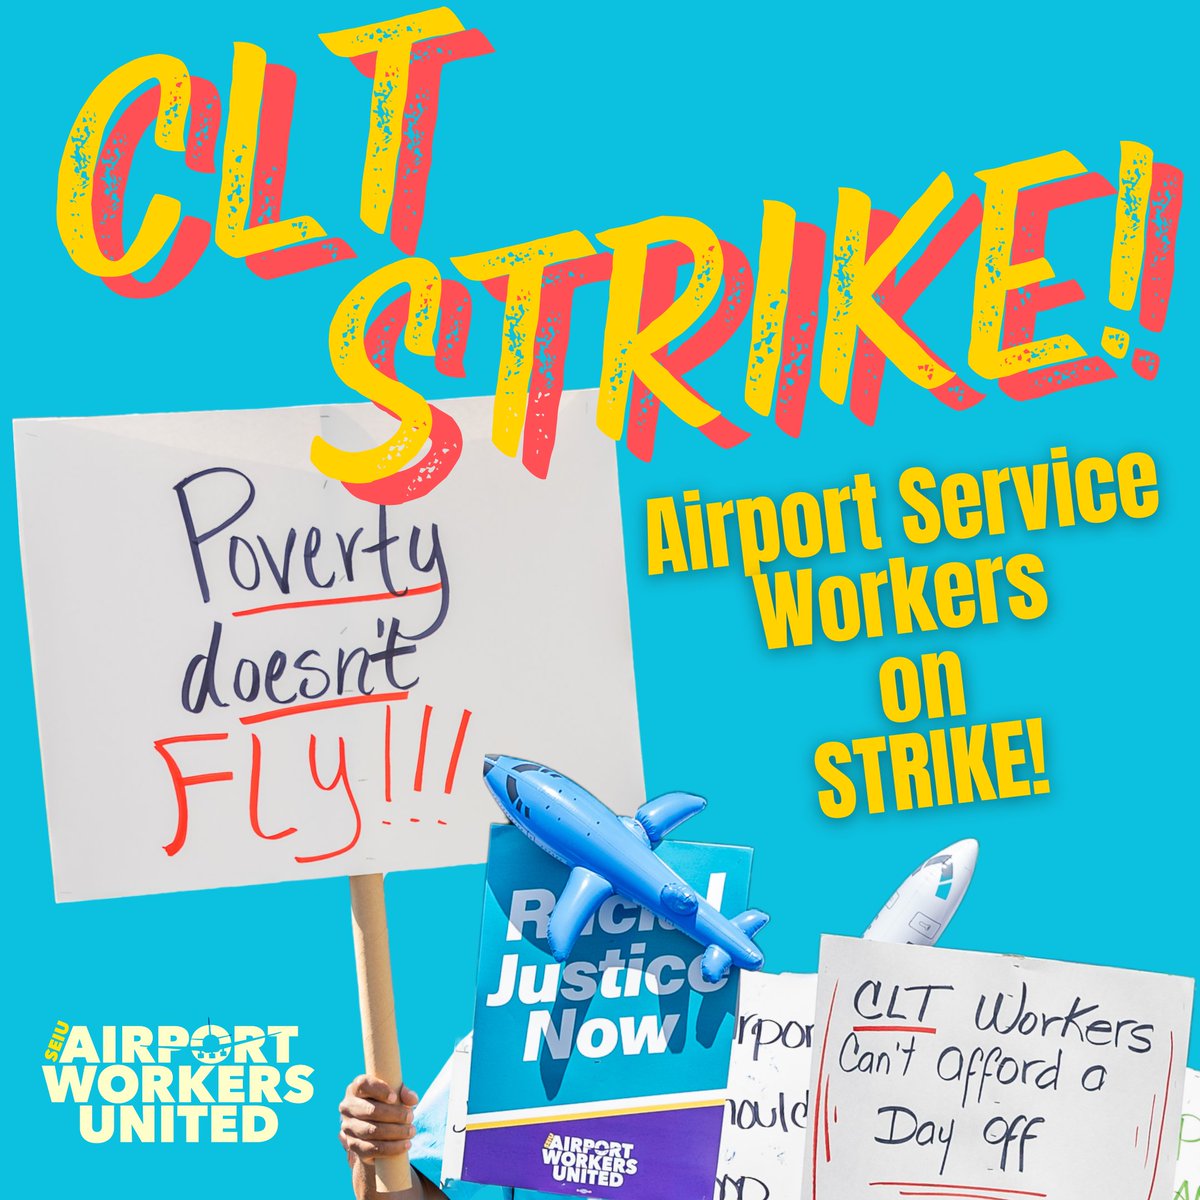 BREAKING! Airport service workers at @CLTAirport are FED UP with the status quo & are ON STRIKE to end poverty wages. We demand respect for our union and the work we do every single day. We make air travel possible!